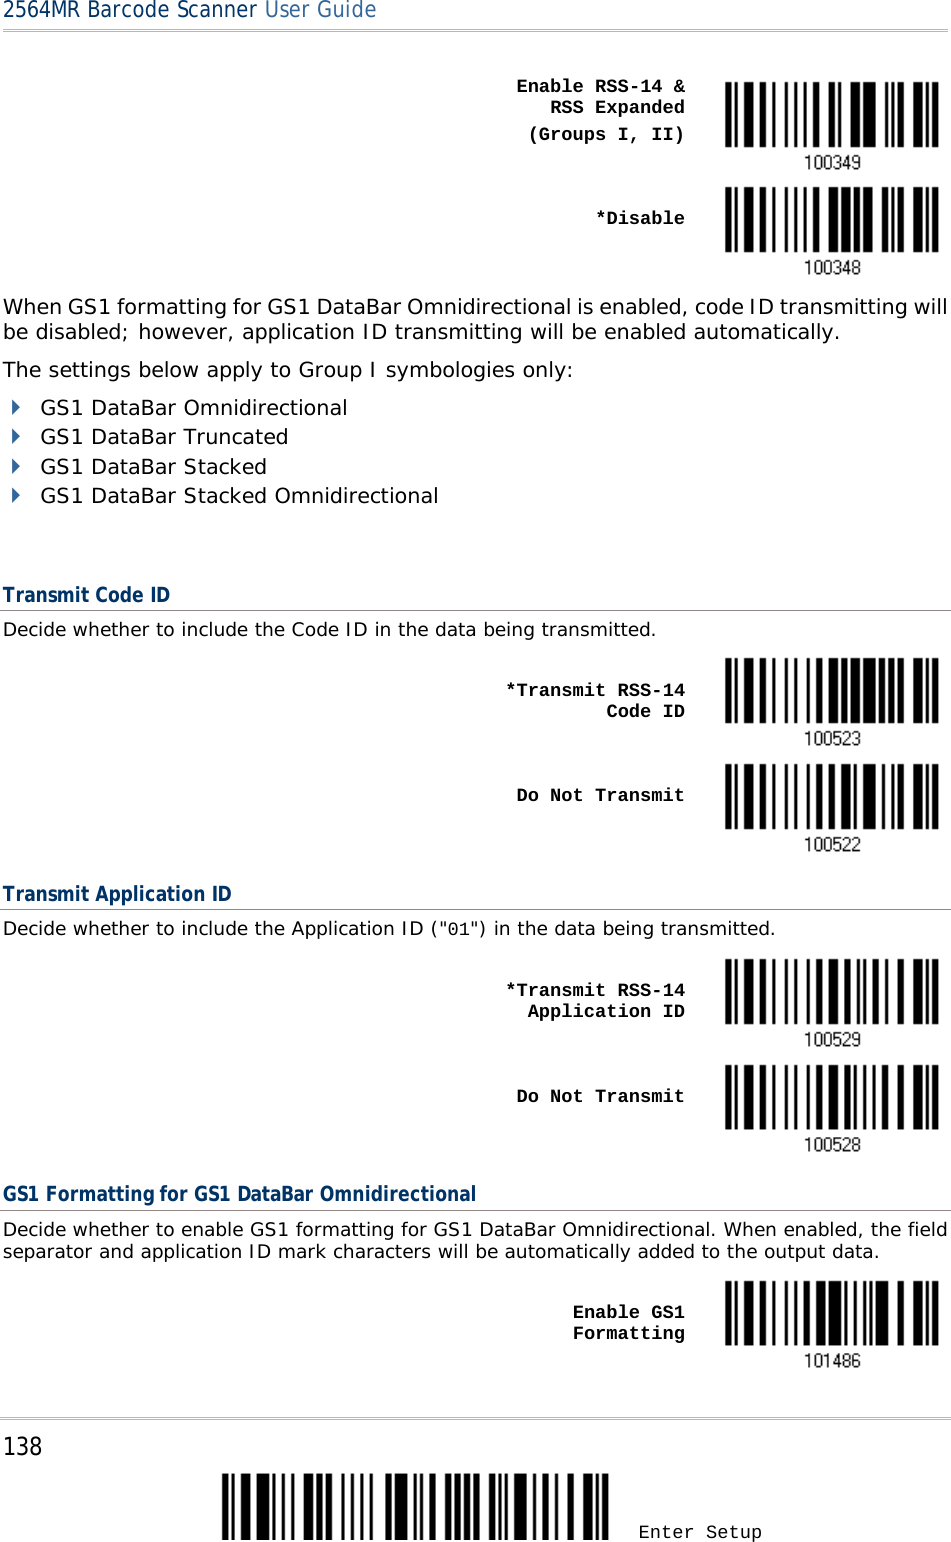 2564MR Barcode Scanner User Guide    Enable RSS-14 &amp;   RSS Expanded (Groups I, II)     *Disable  When GS1 formatting for GS1 DataBar Omnidirectional is enabled, code ID transmitting will be disabled; however, application ID transmitting will be enabled automatically. The settings below apply to Group I symbologies only:  GS1 DataBar Omnidirectional  GS1 DataBar Truncated  GS1 DataBar Stacked  GS1 DataBar Stacked Omnidirectional  Transmit Code ID Decide whether to include the Code ID in the data being transmitted.    *Transmit RSS-14 Code ID     Do Not Transmit  Transmit Application ID Decide whether to include the Application ID (&quot;01&quot;) in the data being transmitted.    *Transmit RSS-14 Application ID     Do Not Transmit  GS1 Formatting for GS1 DataBar Omnidirectional Decide whether to enable GS1 formatting for GS1 DataBar Omnidirectional. When enabled, the field separator and application ID mark characters will be automatically added to the output data.    Enable GS1 Formatting  138 Enter Setup 